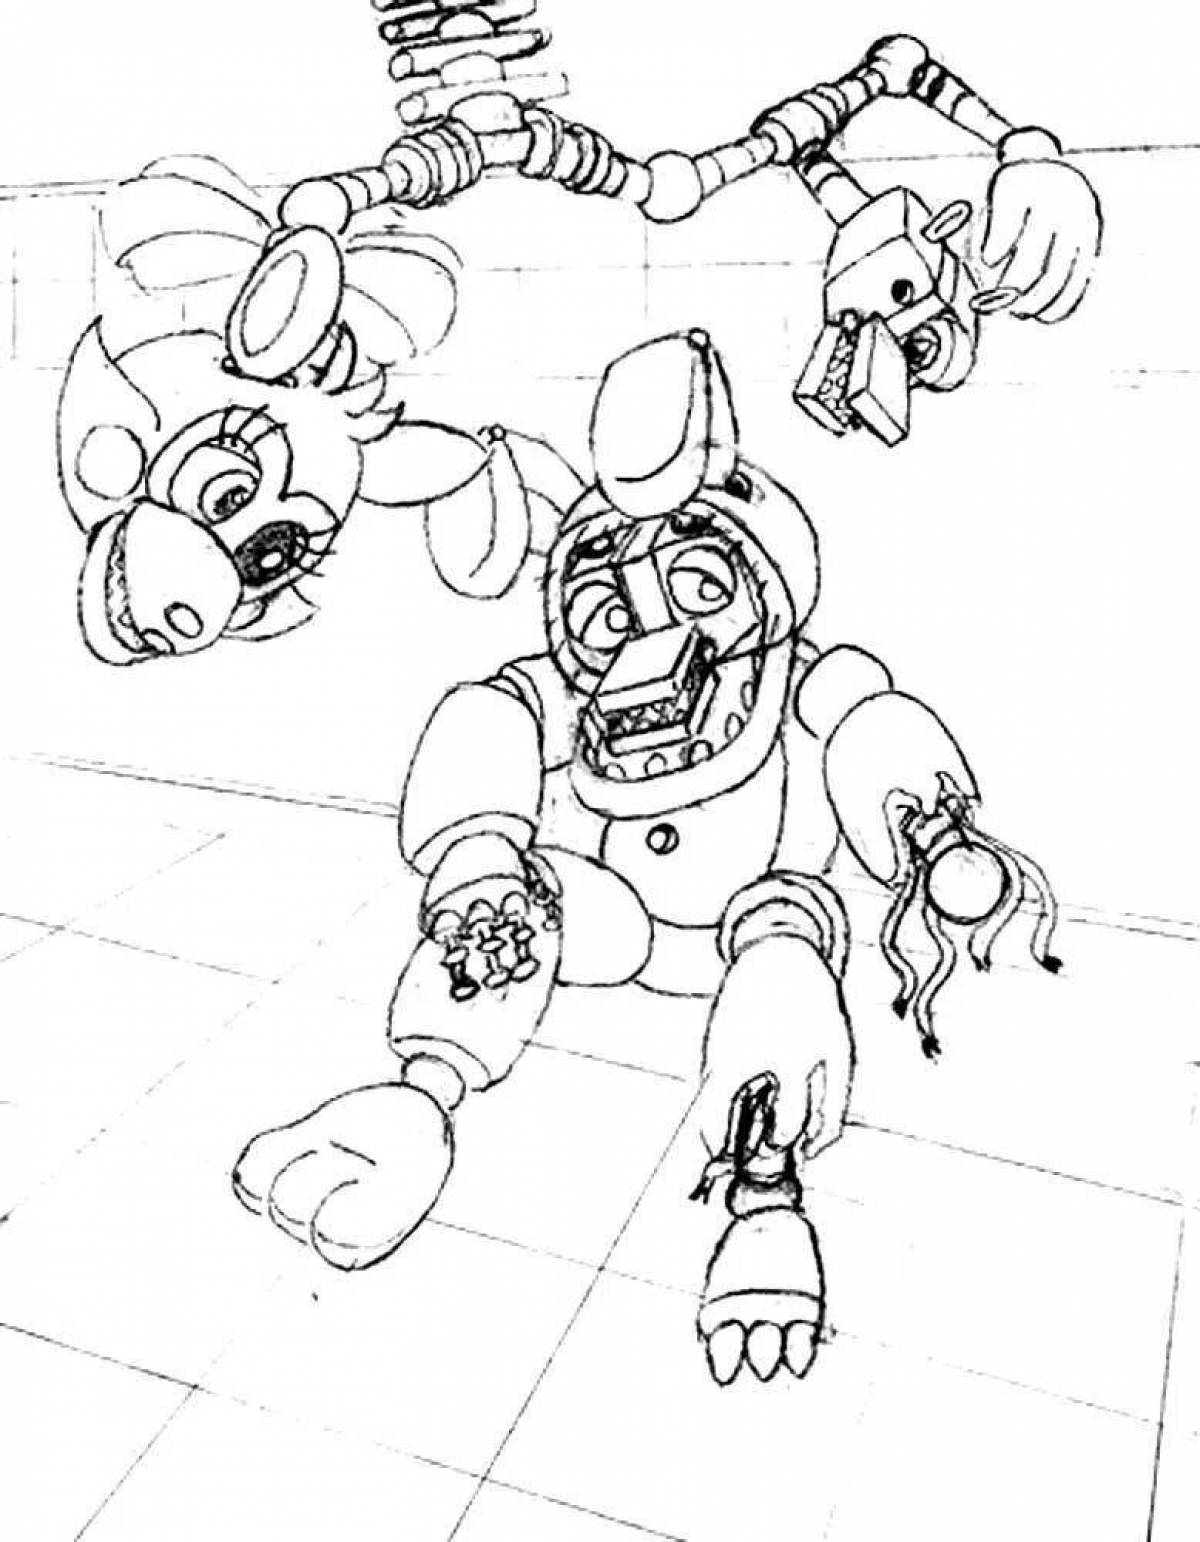 Colorful animatronics coloring page for boys